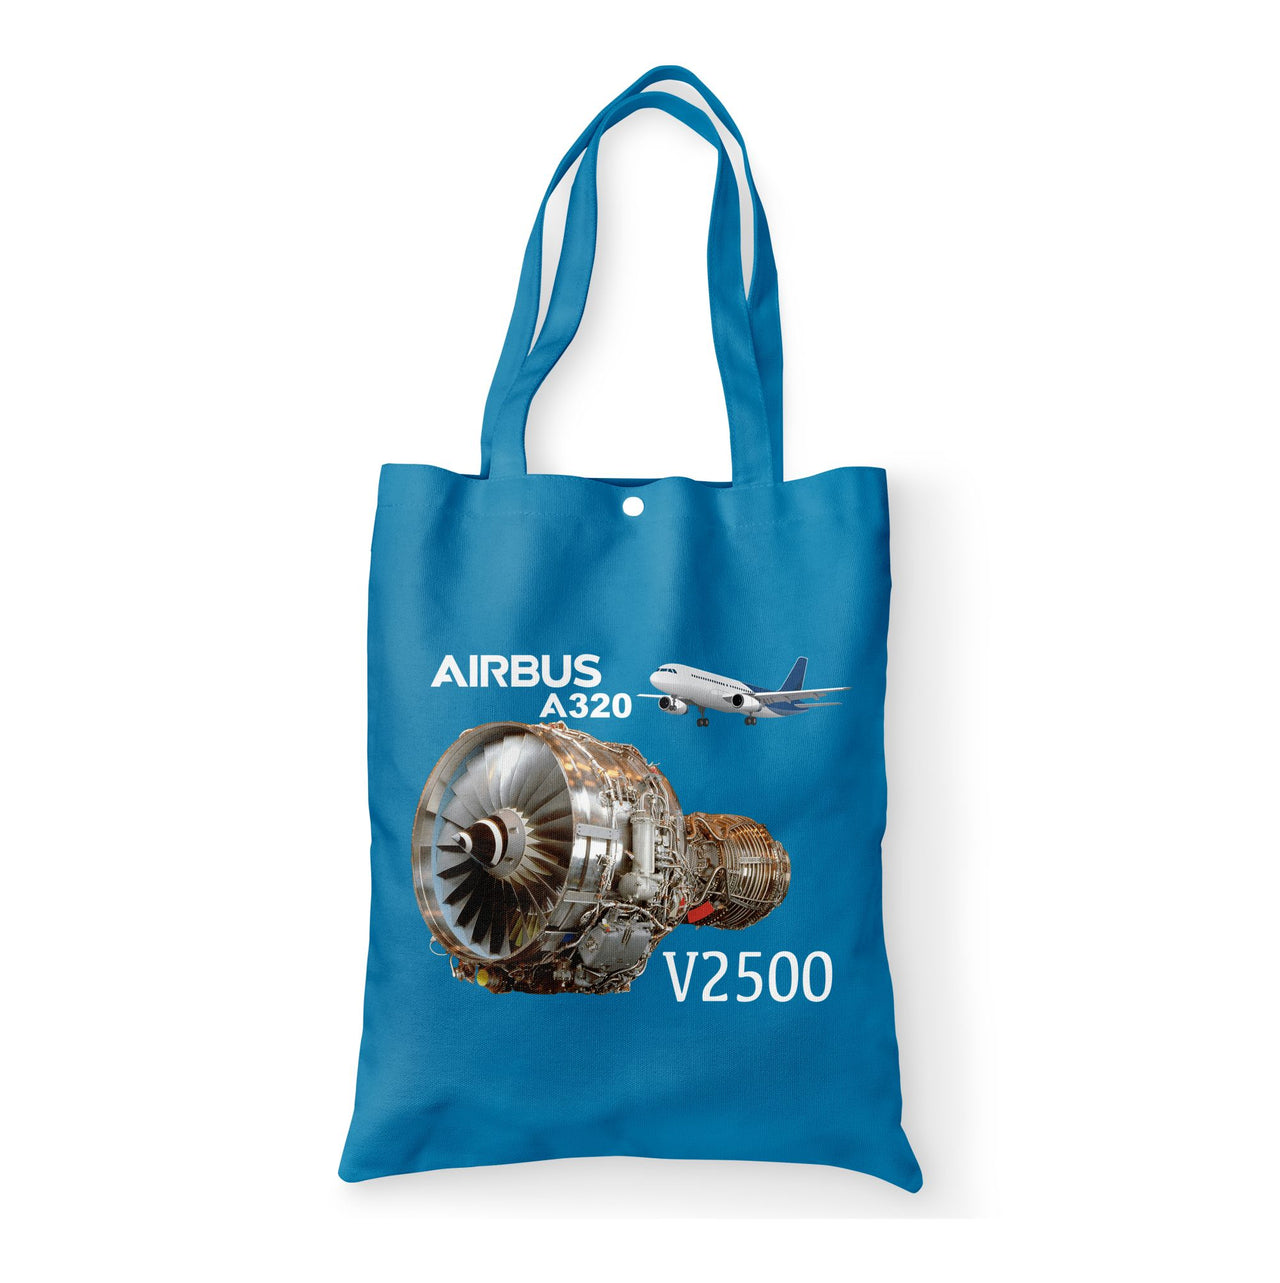 Airbus A320 & V2500 Engine Designed Tote Bags